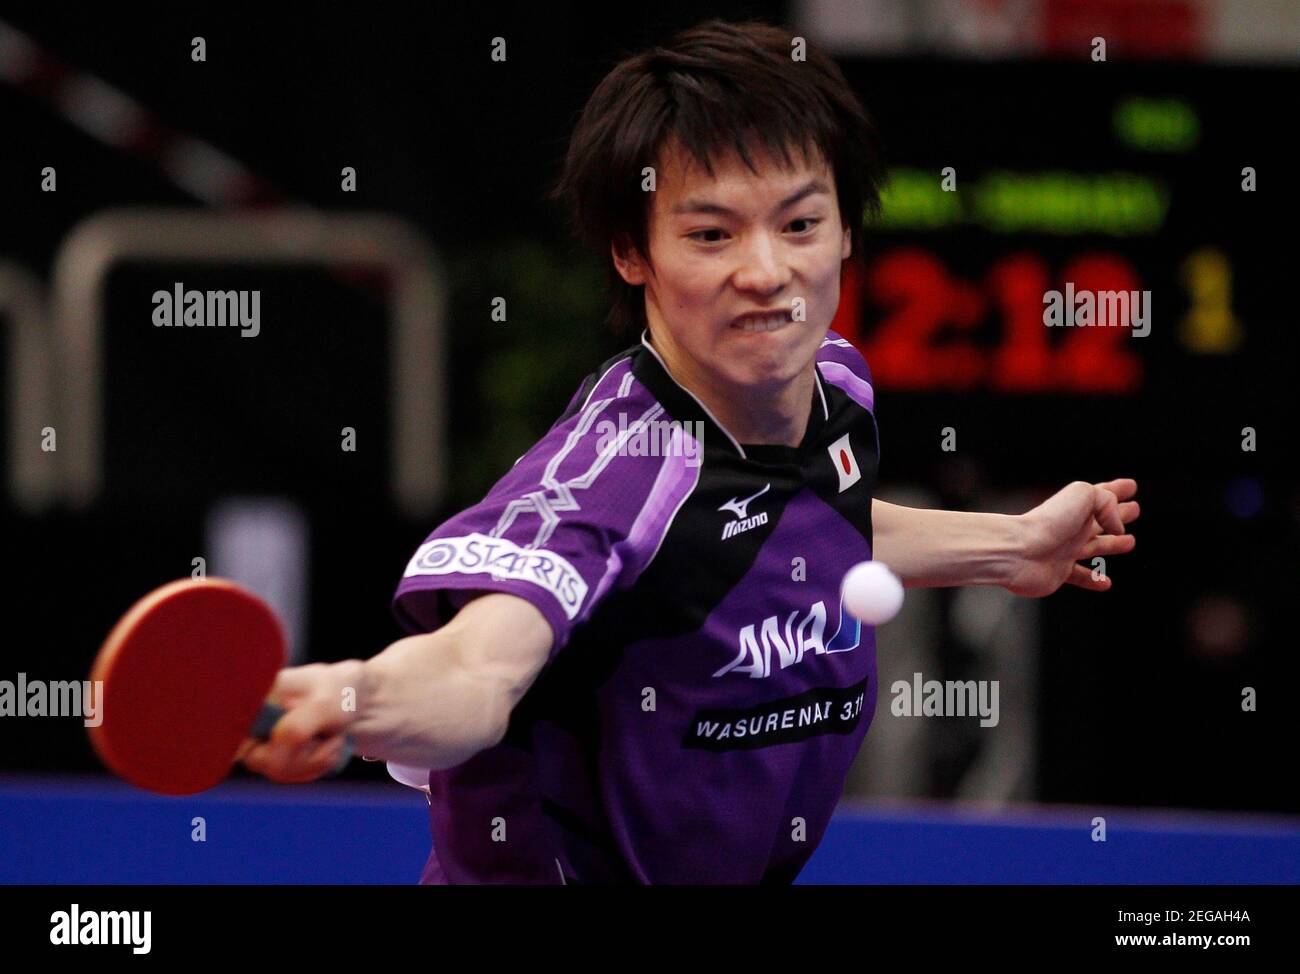 Table Tennis - ITTF Mens World Cup - ISS Dome, Dusseldorf, Germany -  24/10/14 Kenta Matsudaira of Japan in action Mandatory Credit: Ina  Fassbender / ITTF via Action Images Livepic EDITORIAL USE